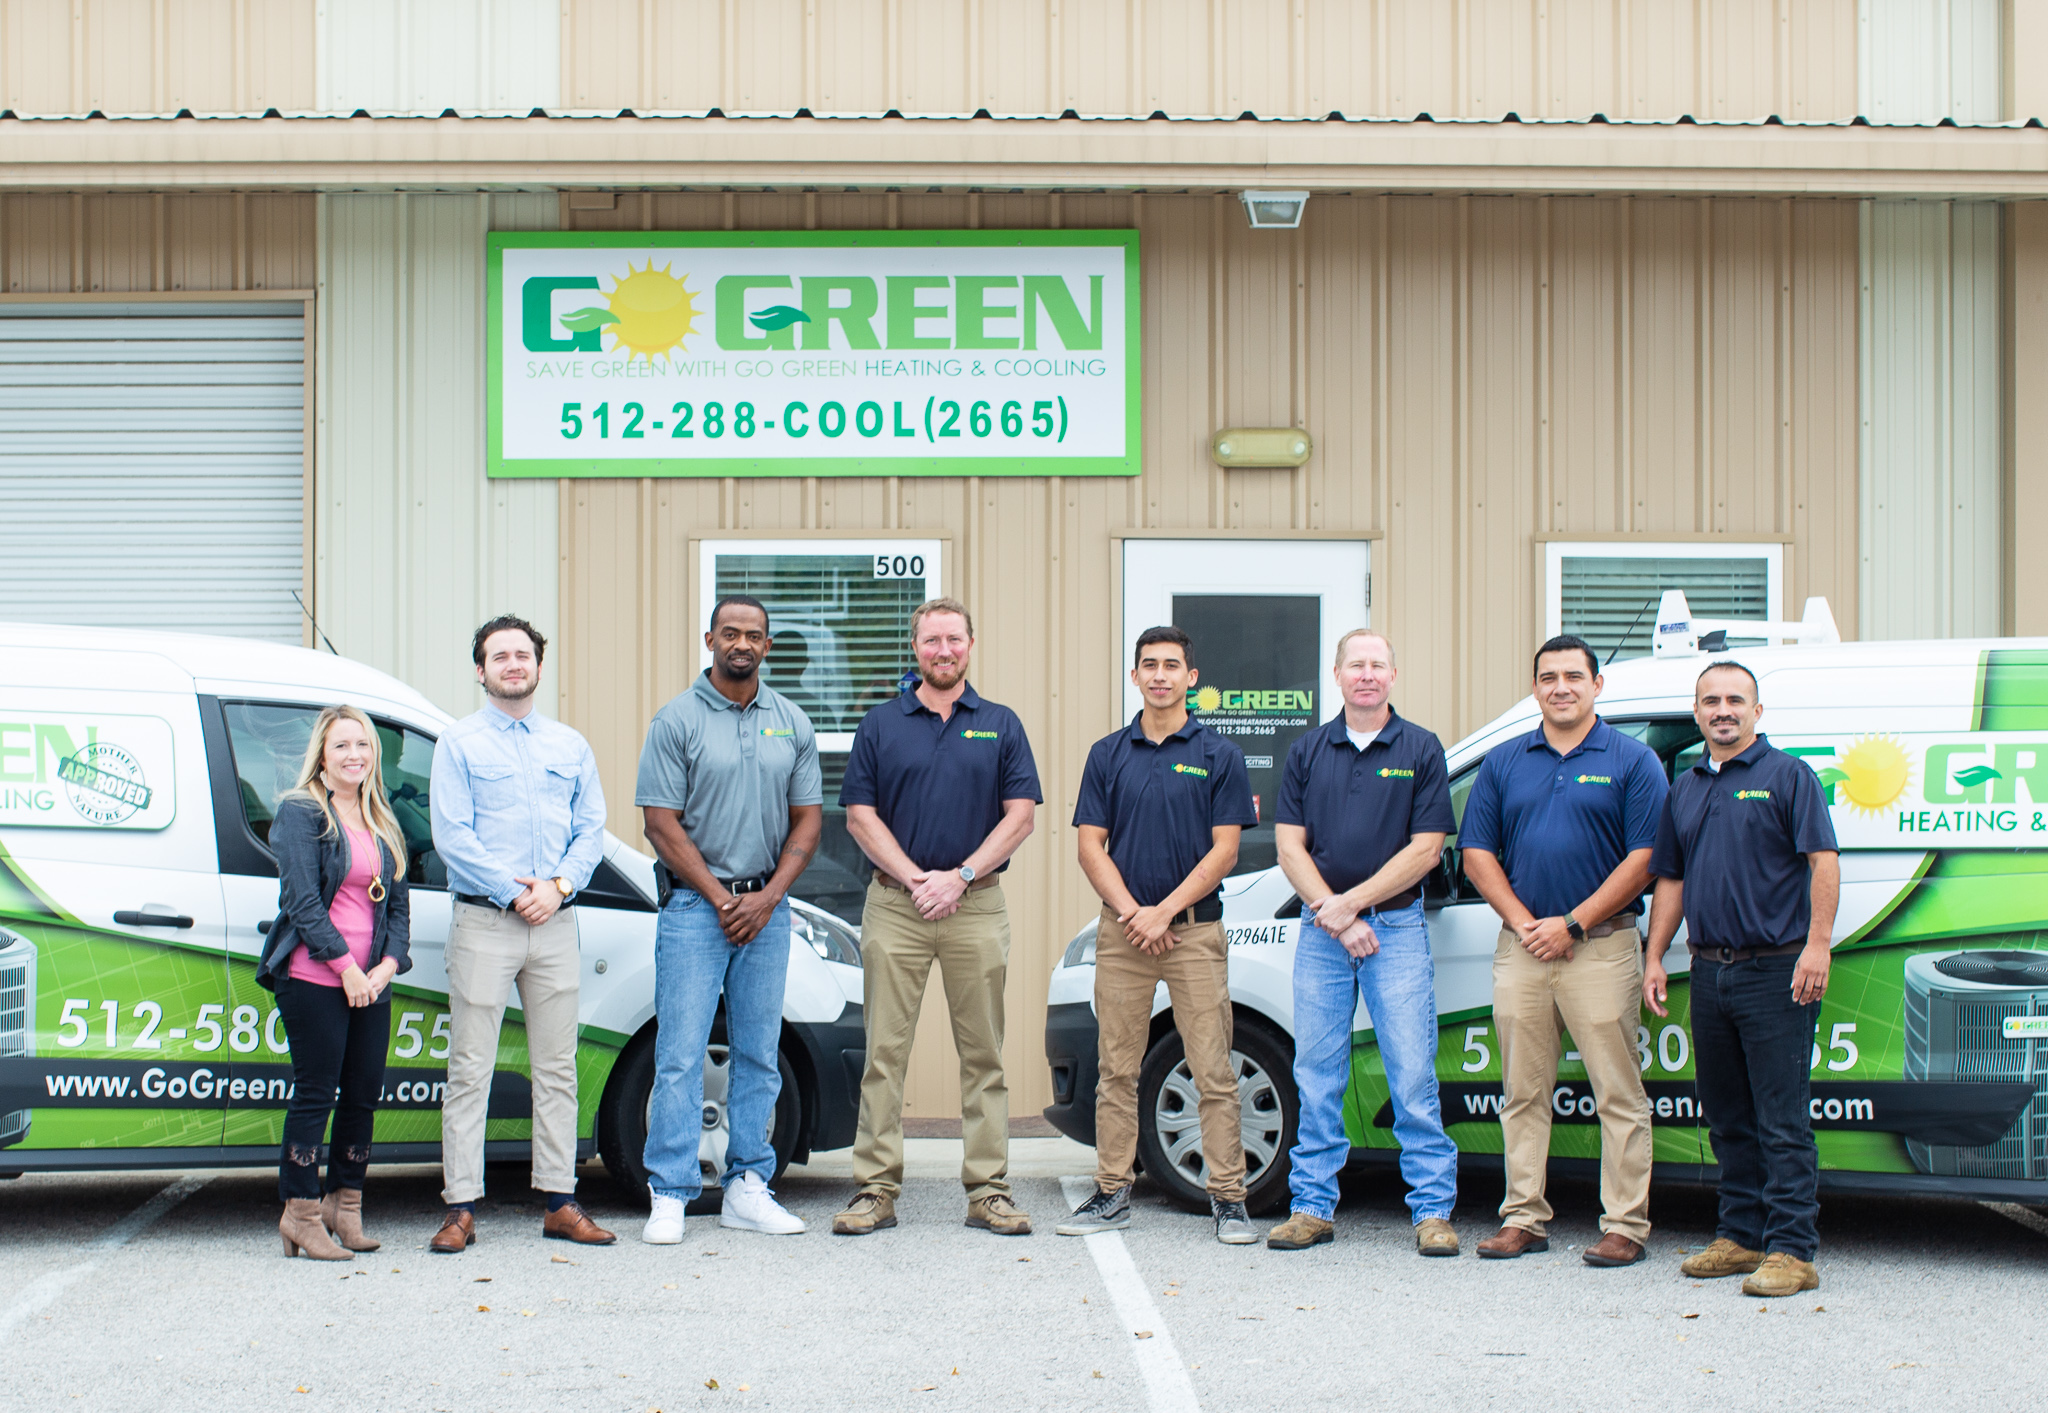 go green heating and cooling employees posing for a picture outside their office, in front of branded company vans